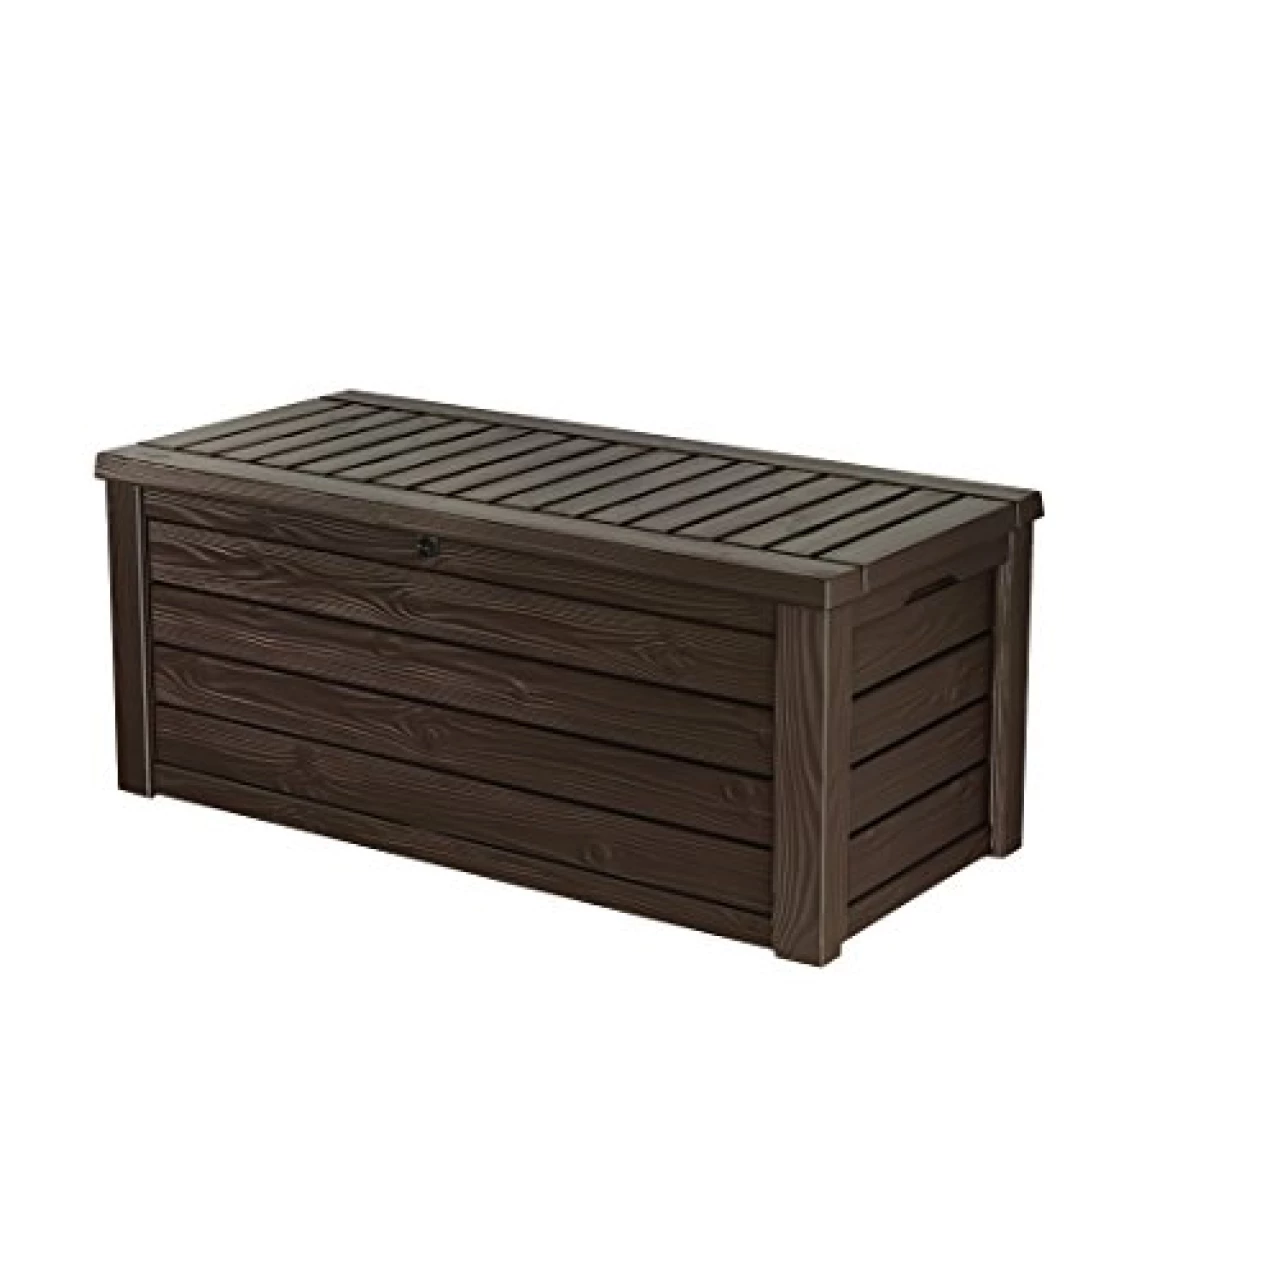 Keter Westwood 150 Gallon Plastic Backyard Outdoor Storage Deck Box for Patio Decor, Furniture Cushions, Garden Tools, &amp; Pool Accessories, Espresso